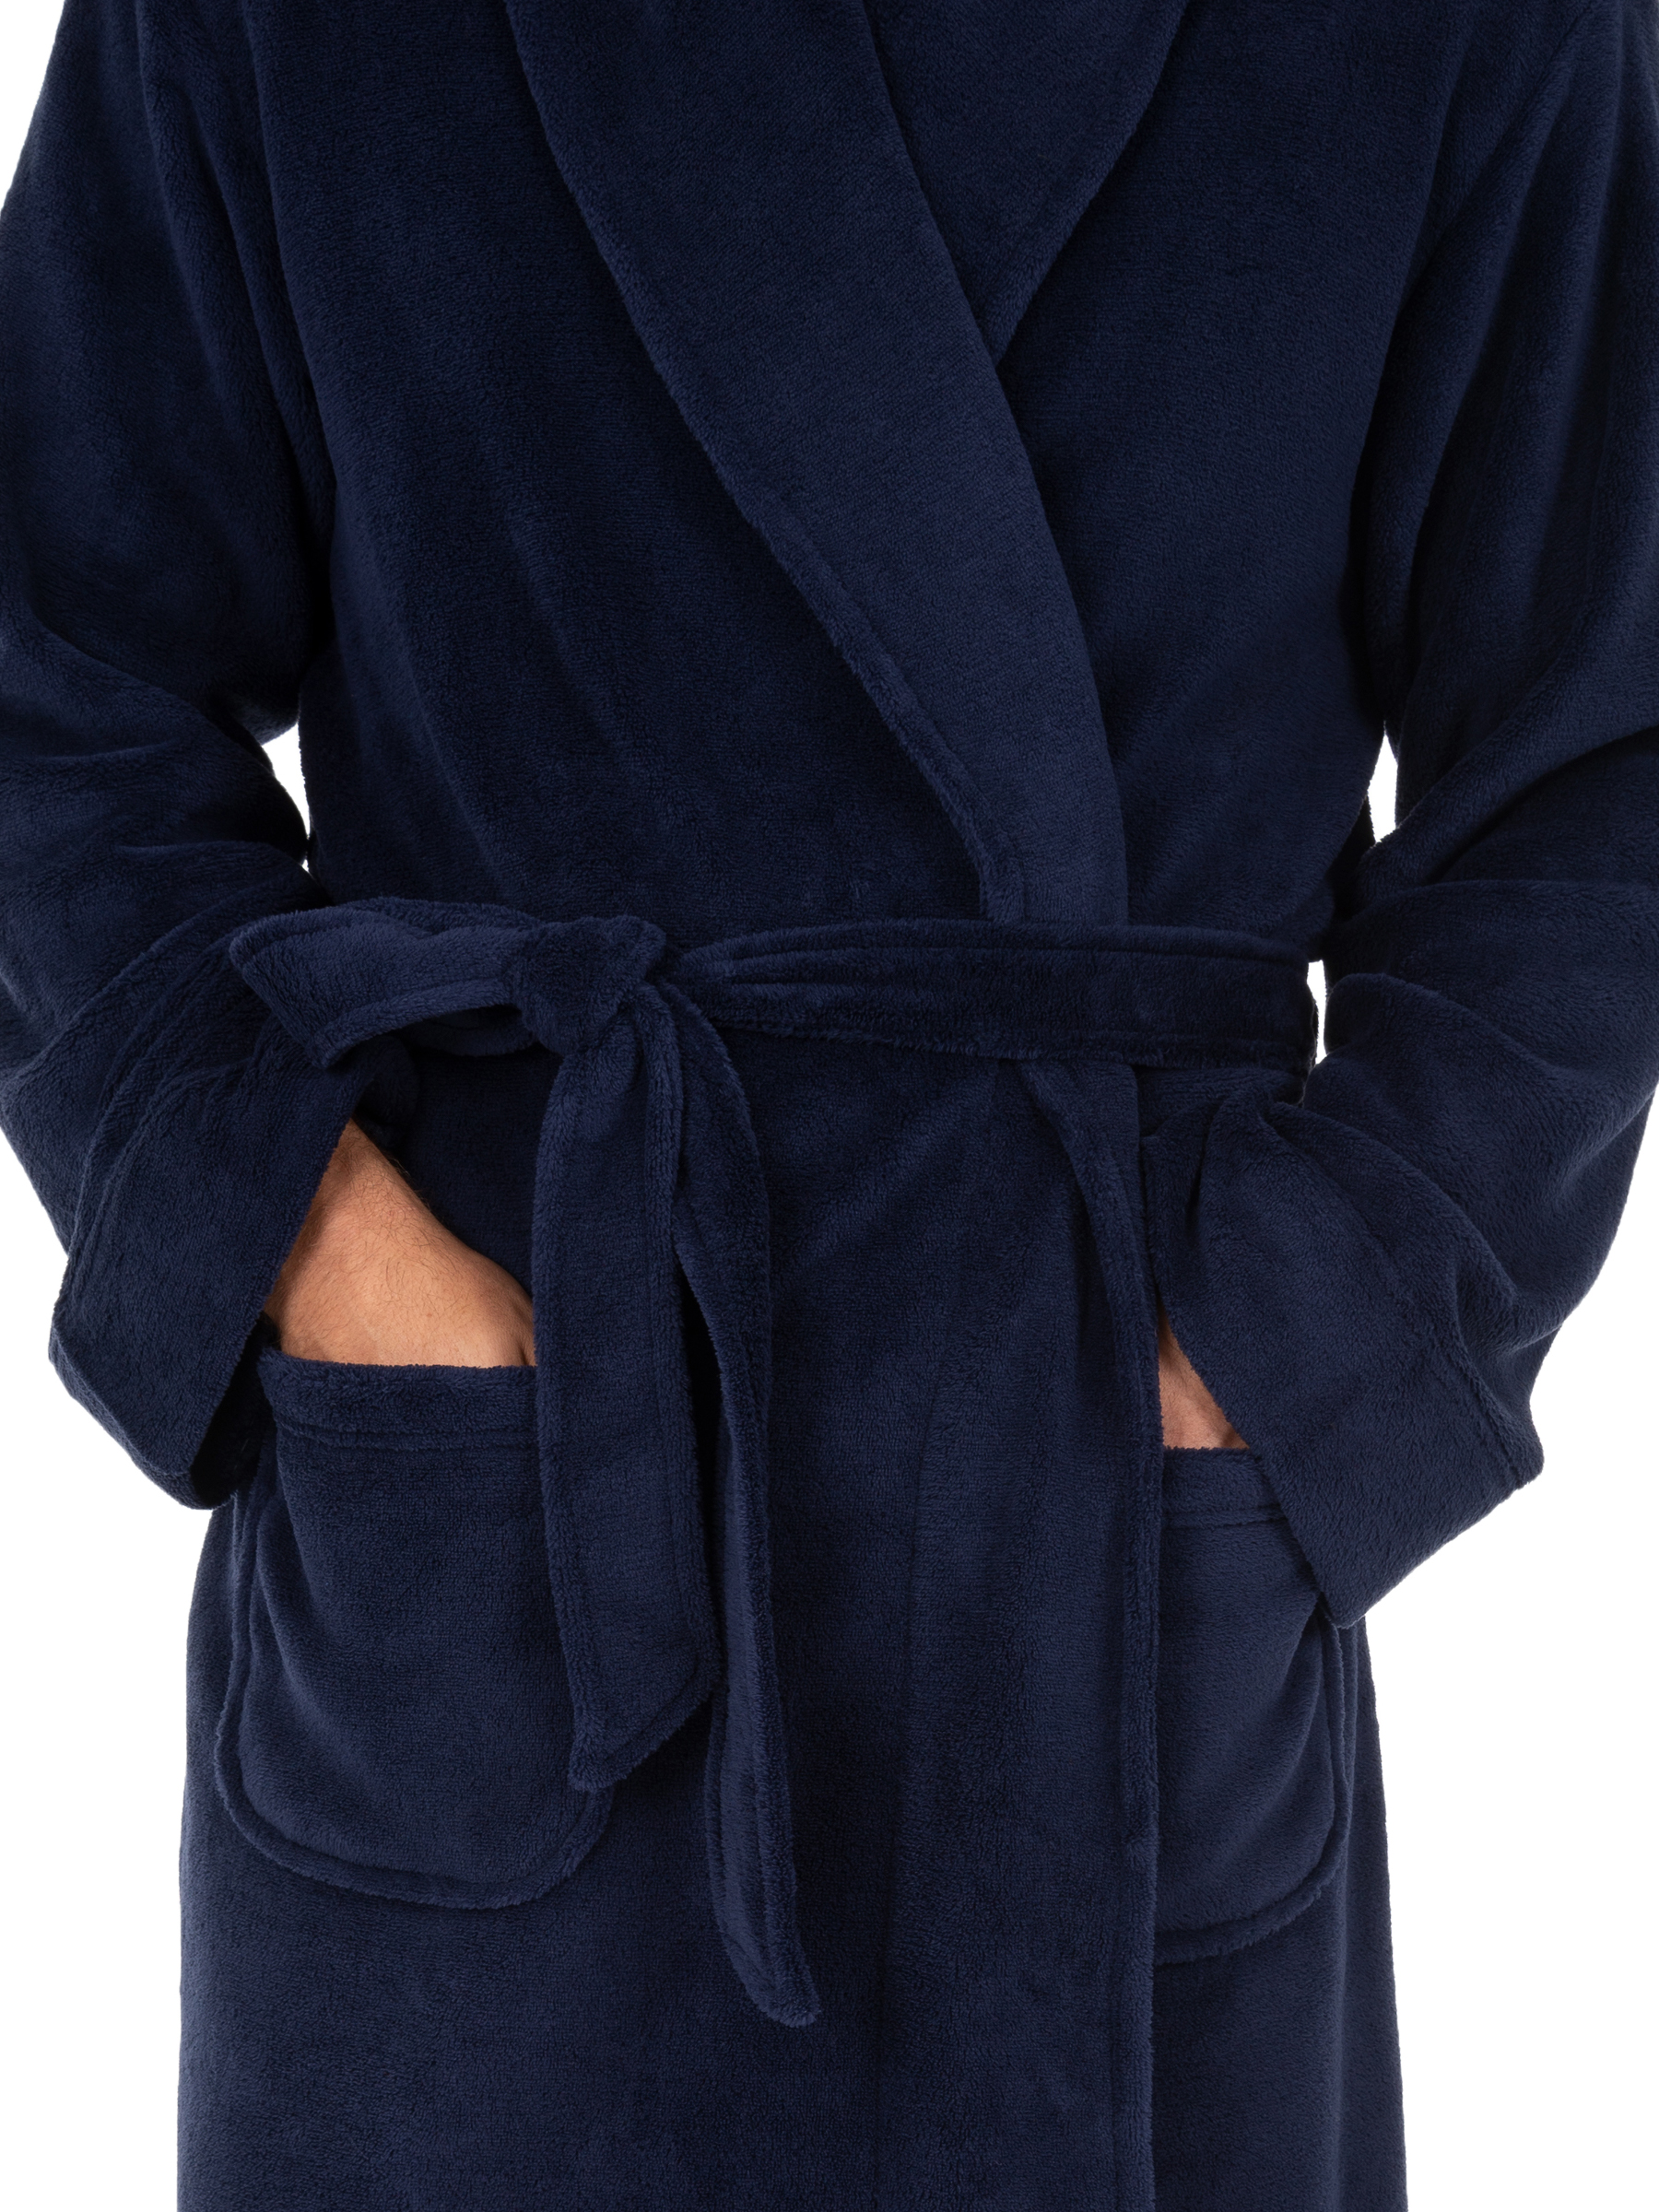 Fruit of the Loom Adult Mens Solid Plush Fleece Bathrobe One Size - image 3 of 5